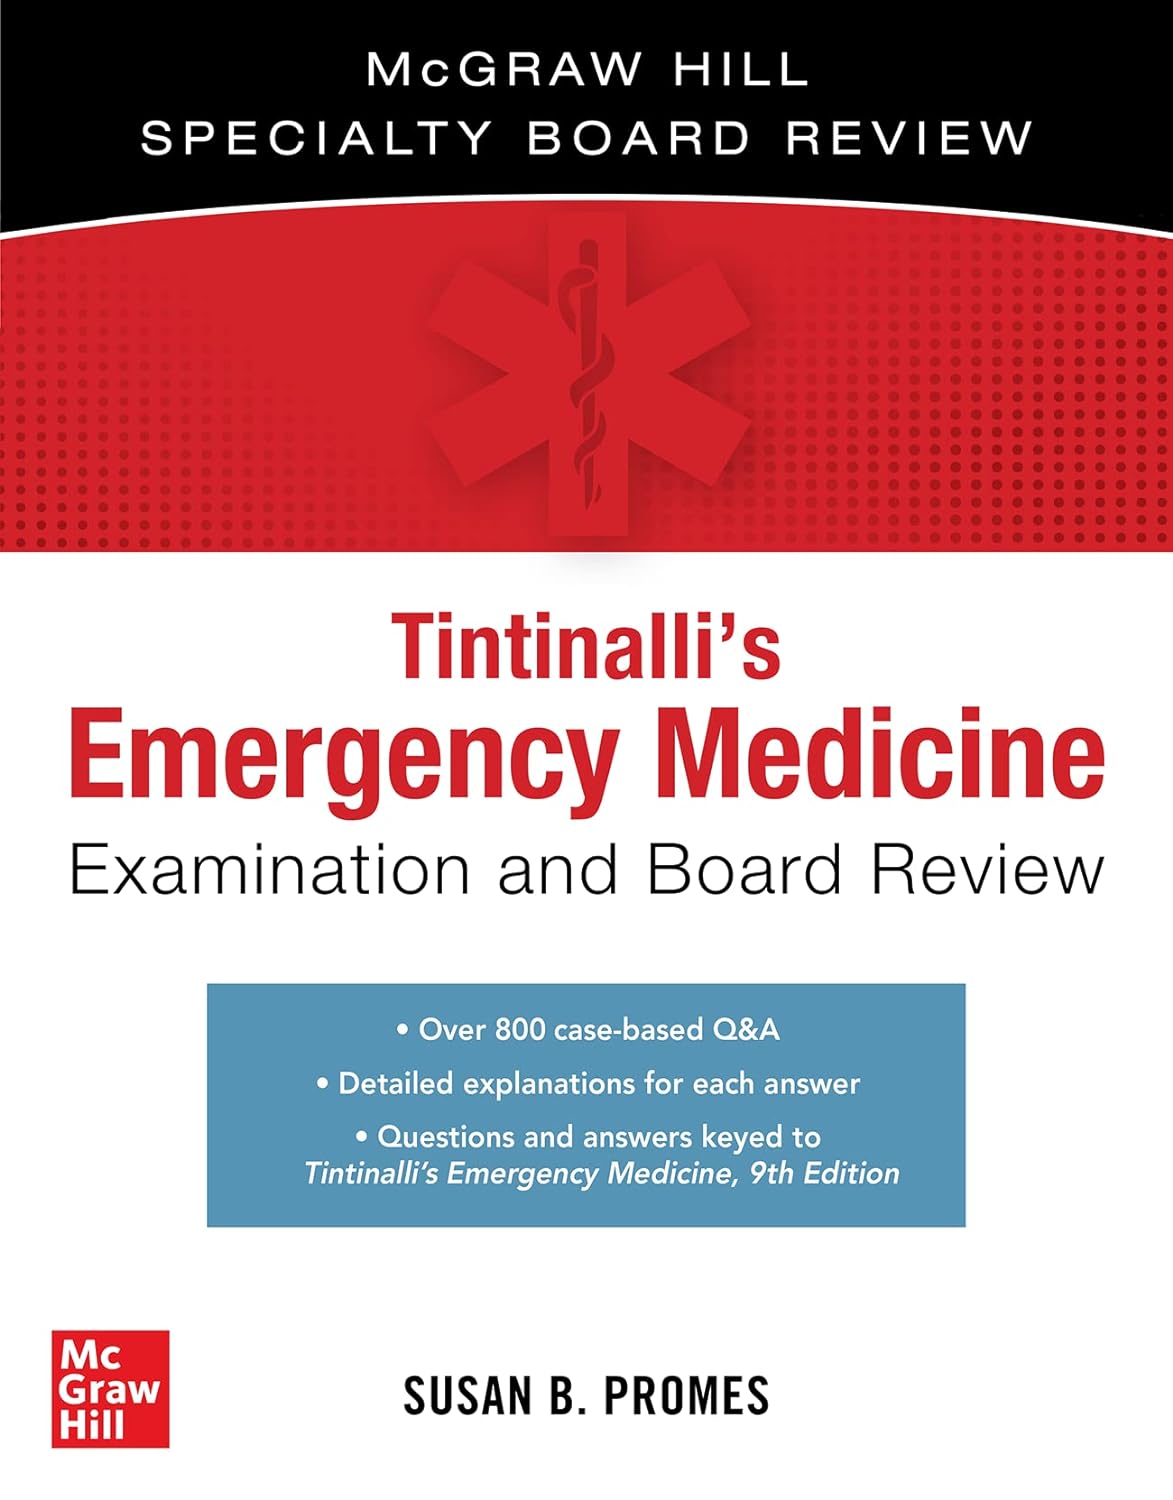 Tintinalli's Emergency Medicine Examination and Board Review (The Mcgraw Hill Specialty Board Review) 3rd Edition